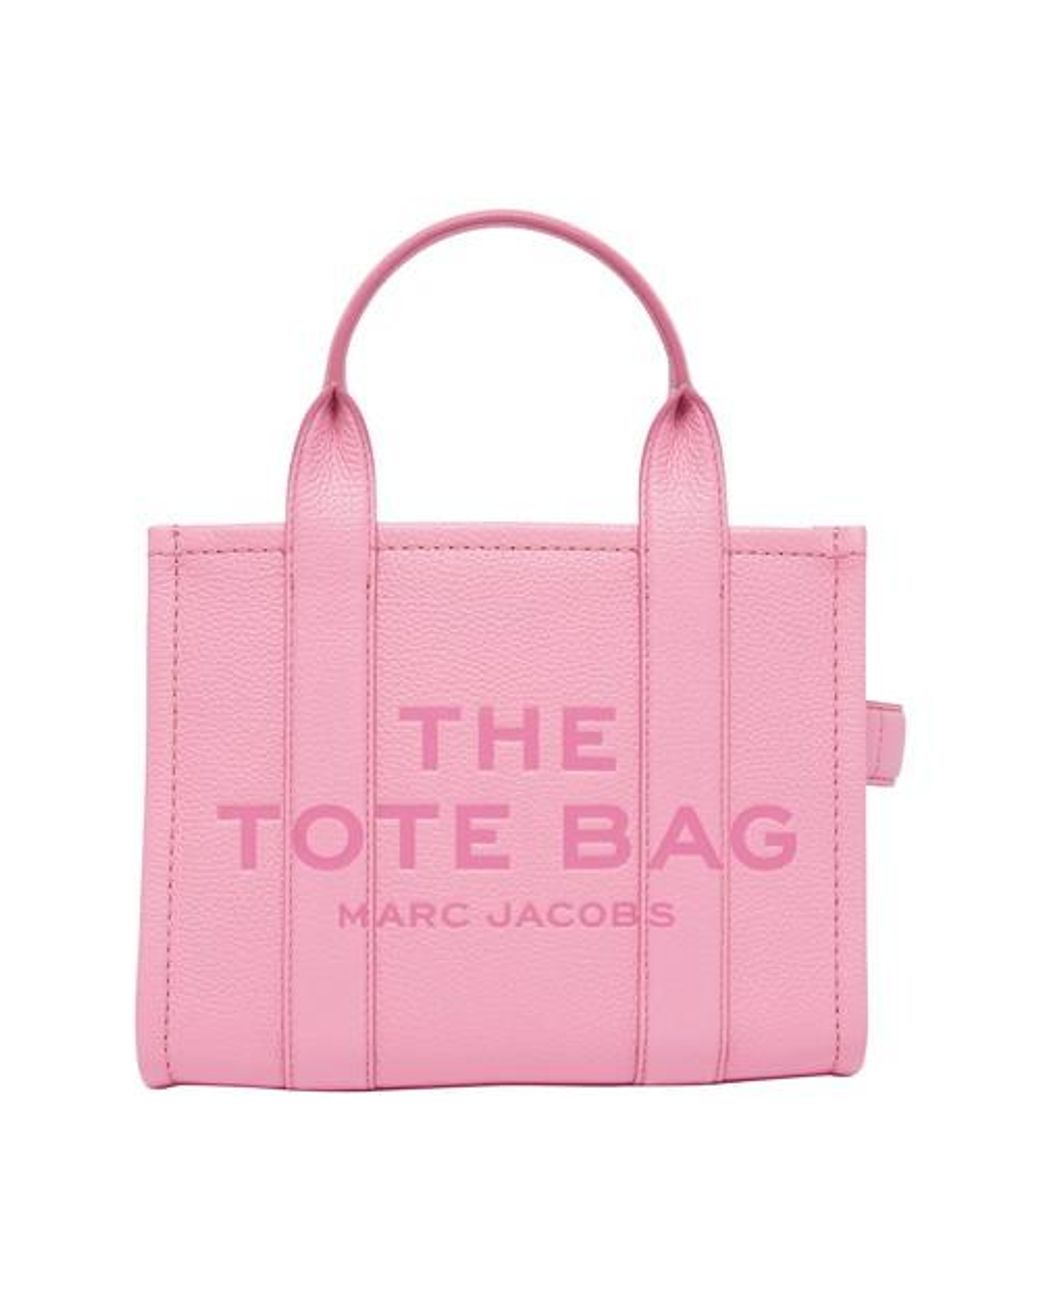 Marc Jacobs The Leather Mini Tote Bag in Pink | Lyst UK